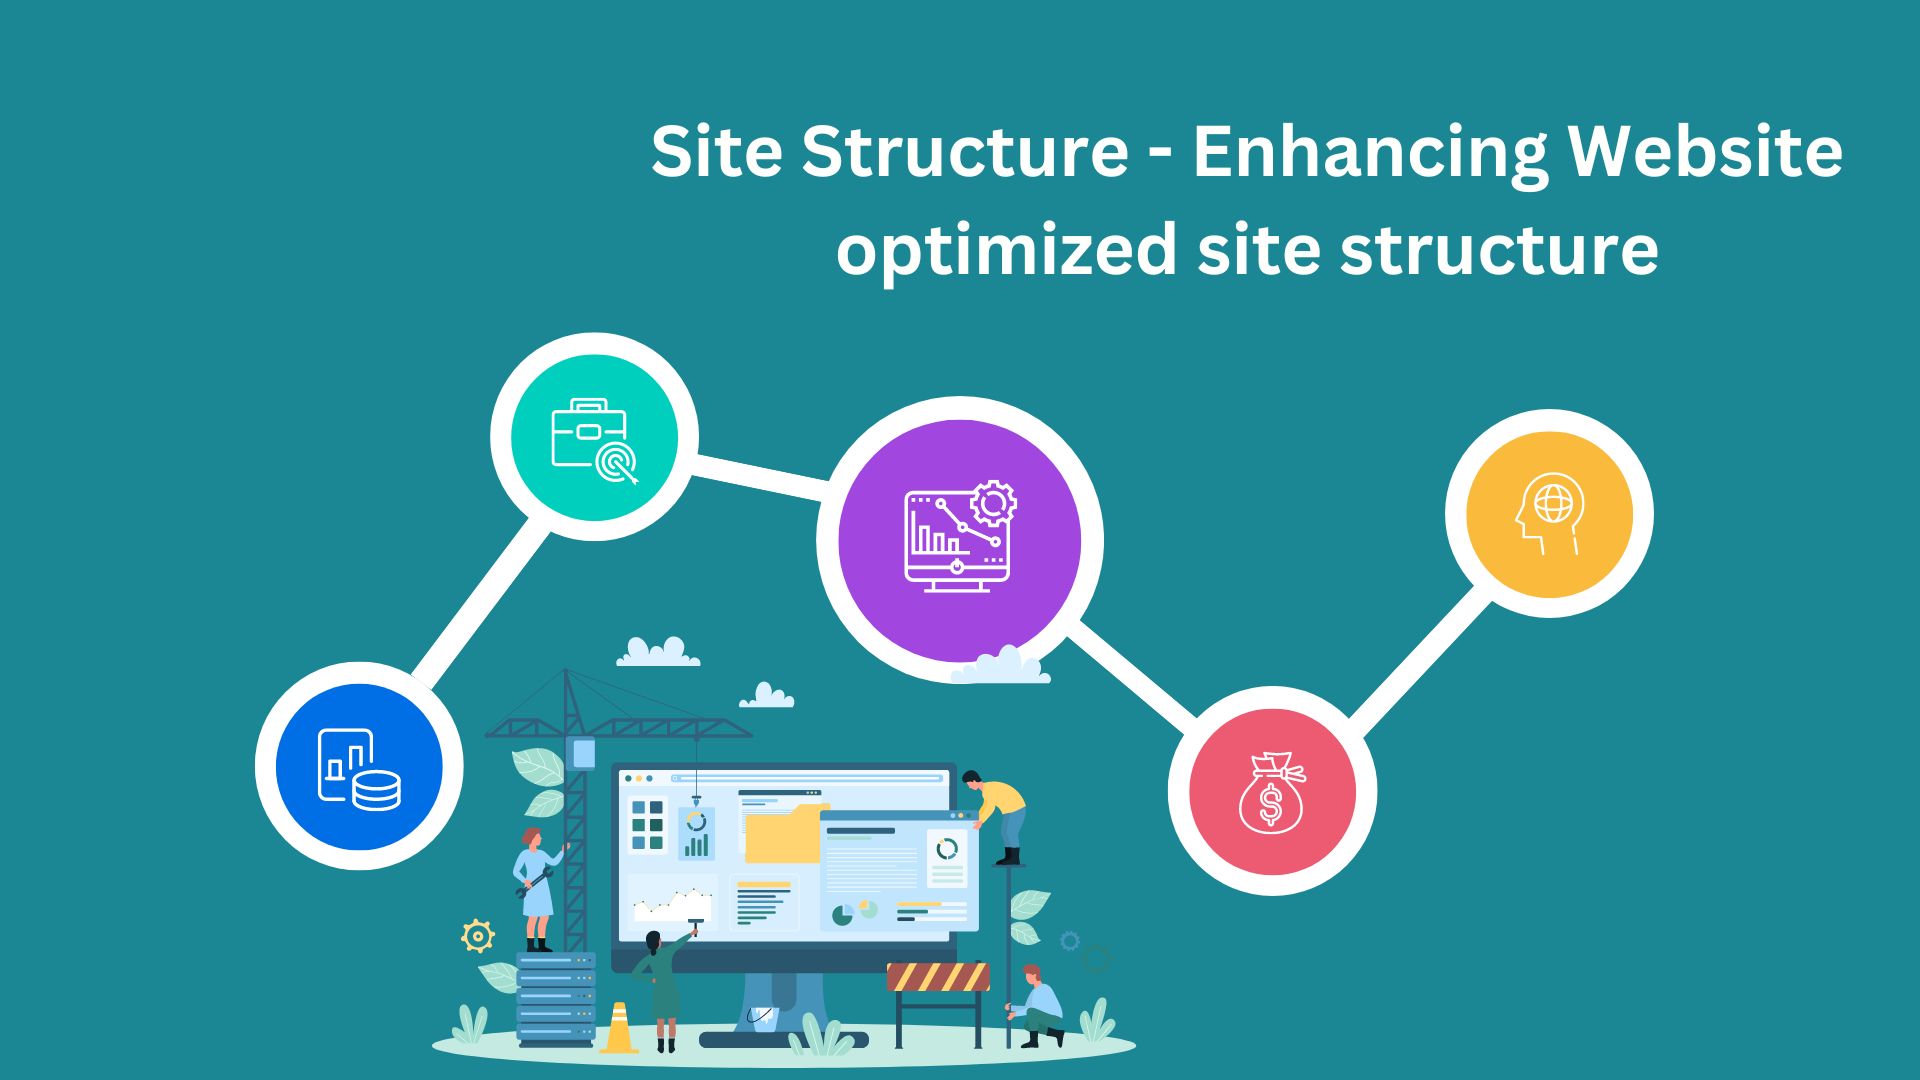 Site Structure - Enhancing Website optimized site structure